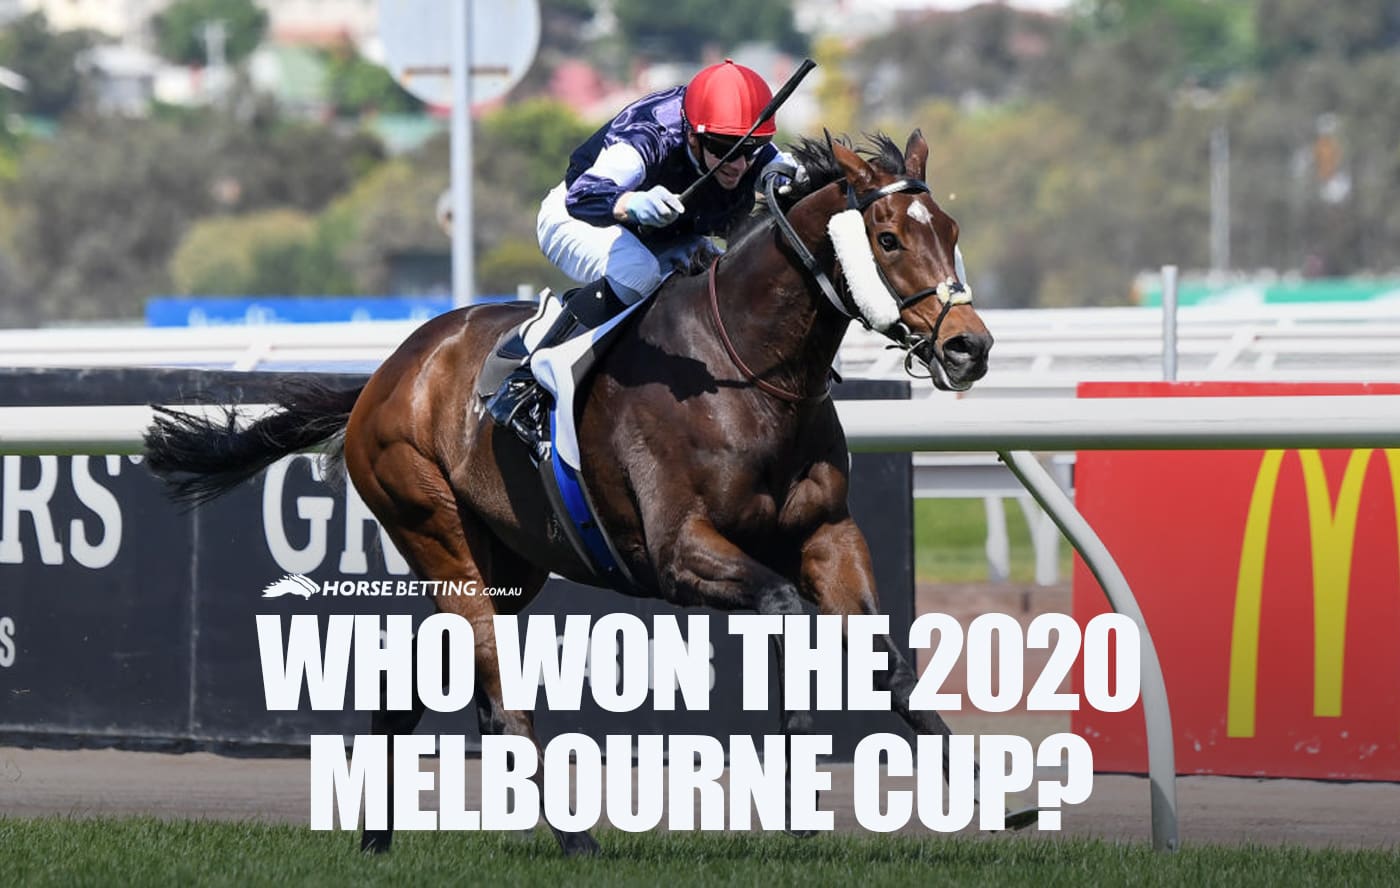 Who won the 2020 Melbourne Cup?